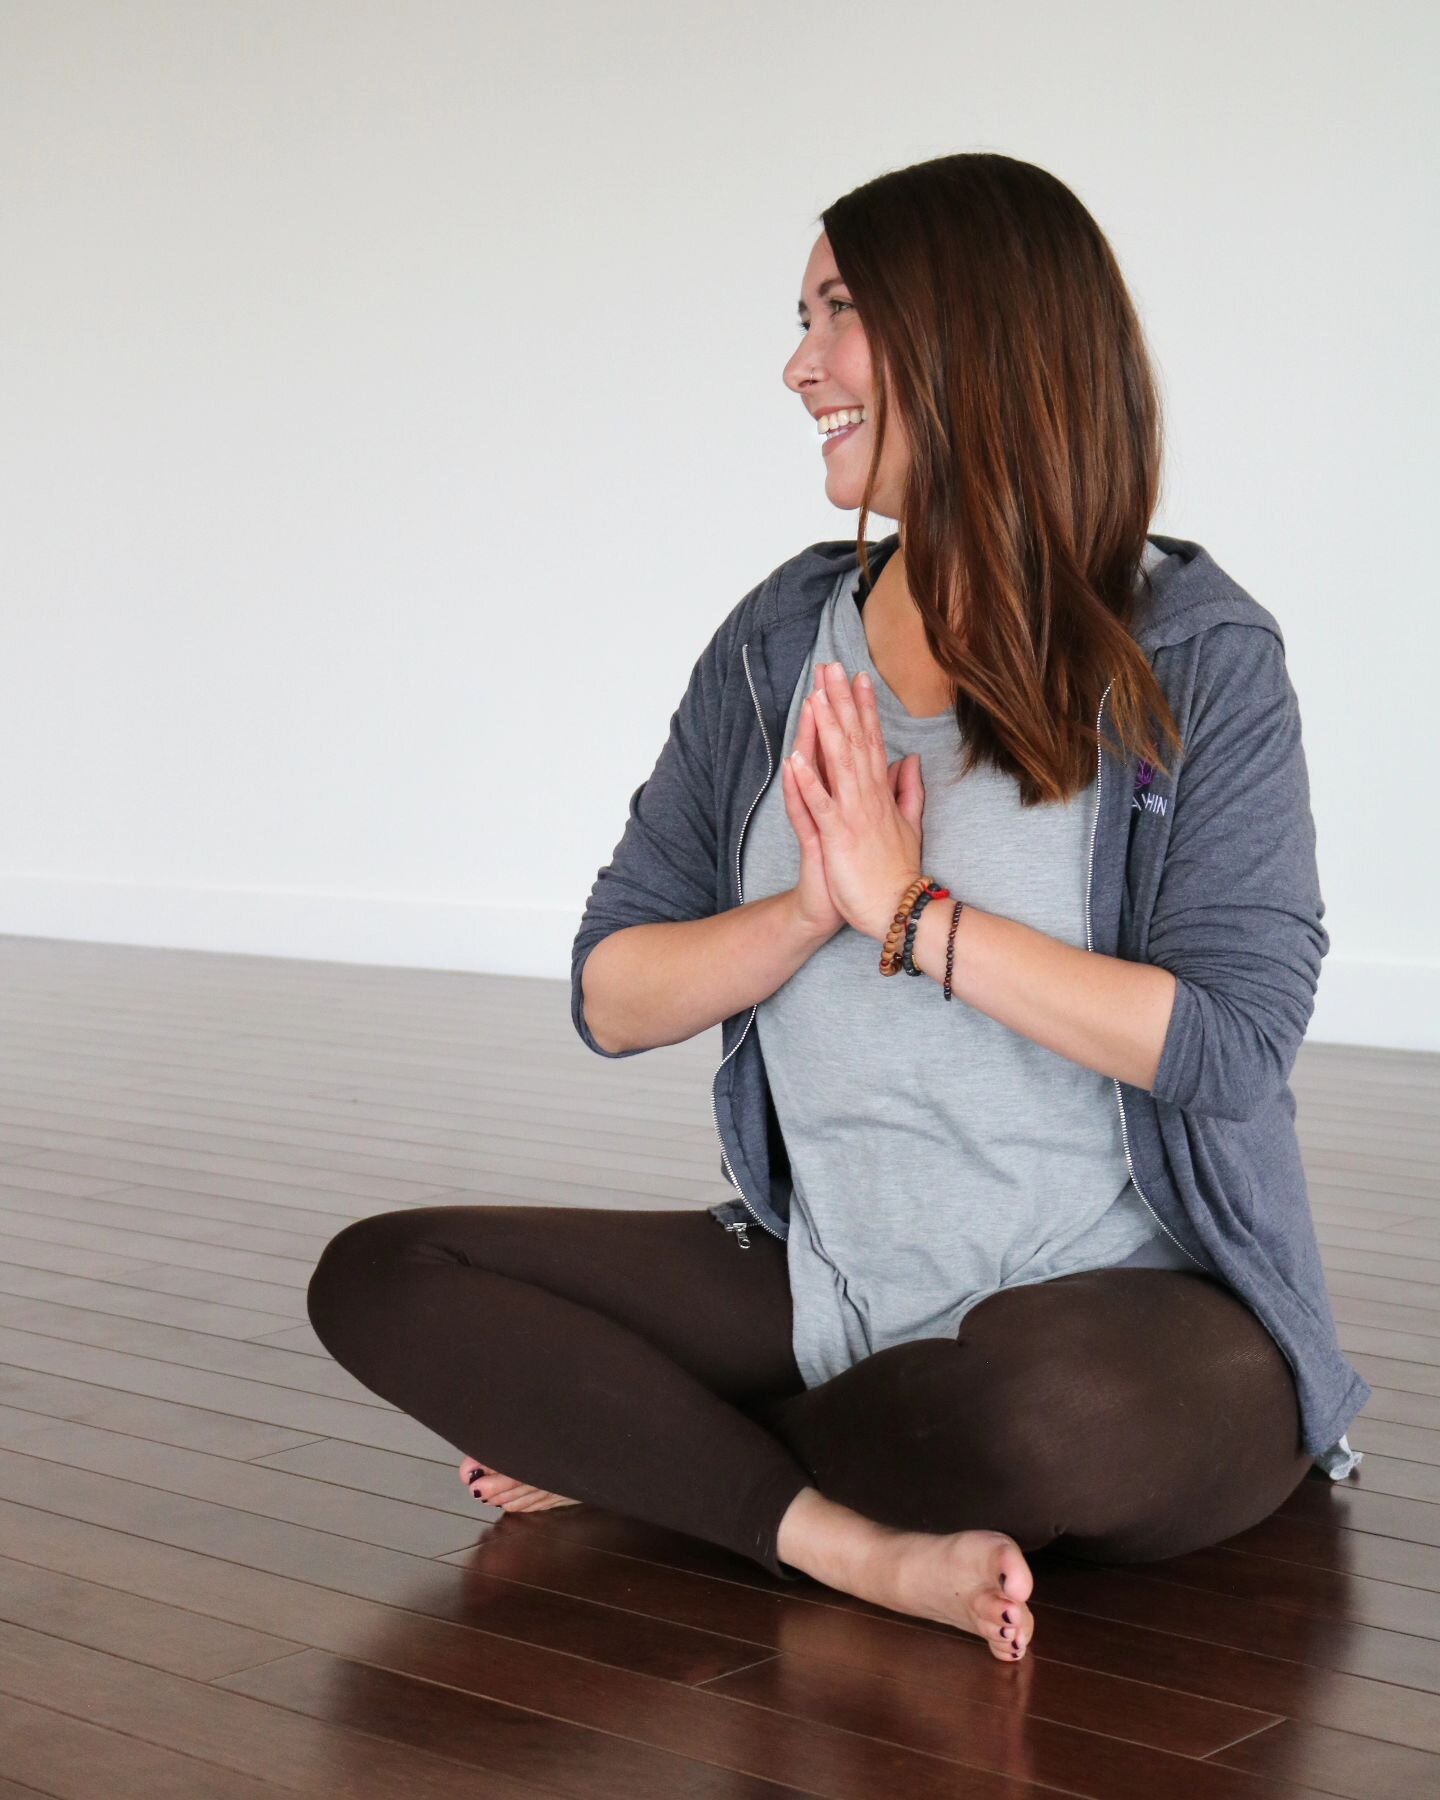 Join Rebecca for April's Monthly Meditation session April 5th 7-8pm on Zoom. All levels of meditation experience are welcome. Register now at yogawithin.ca